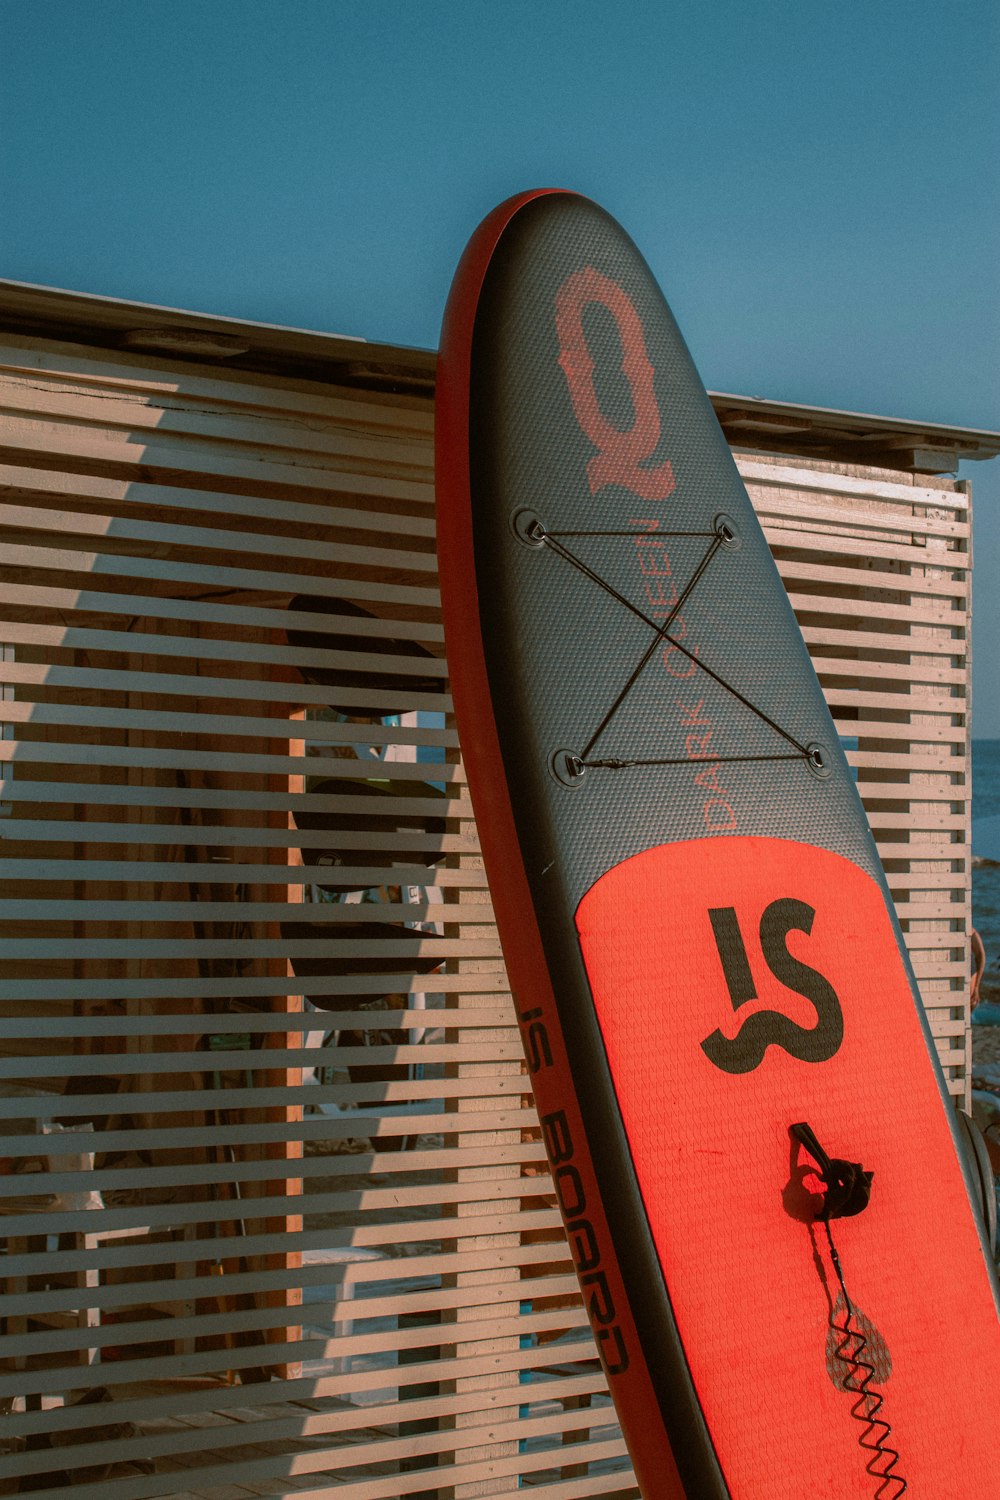 a surfboard leaning up against a window with blinds